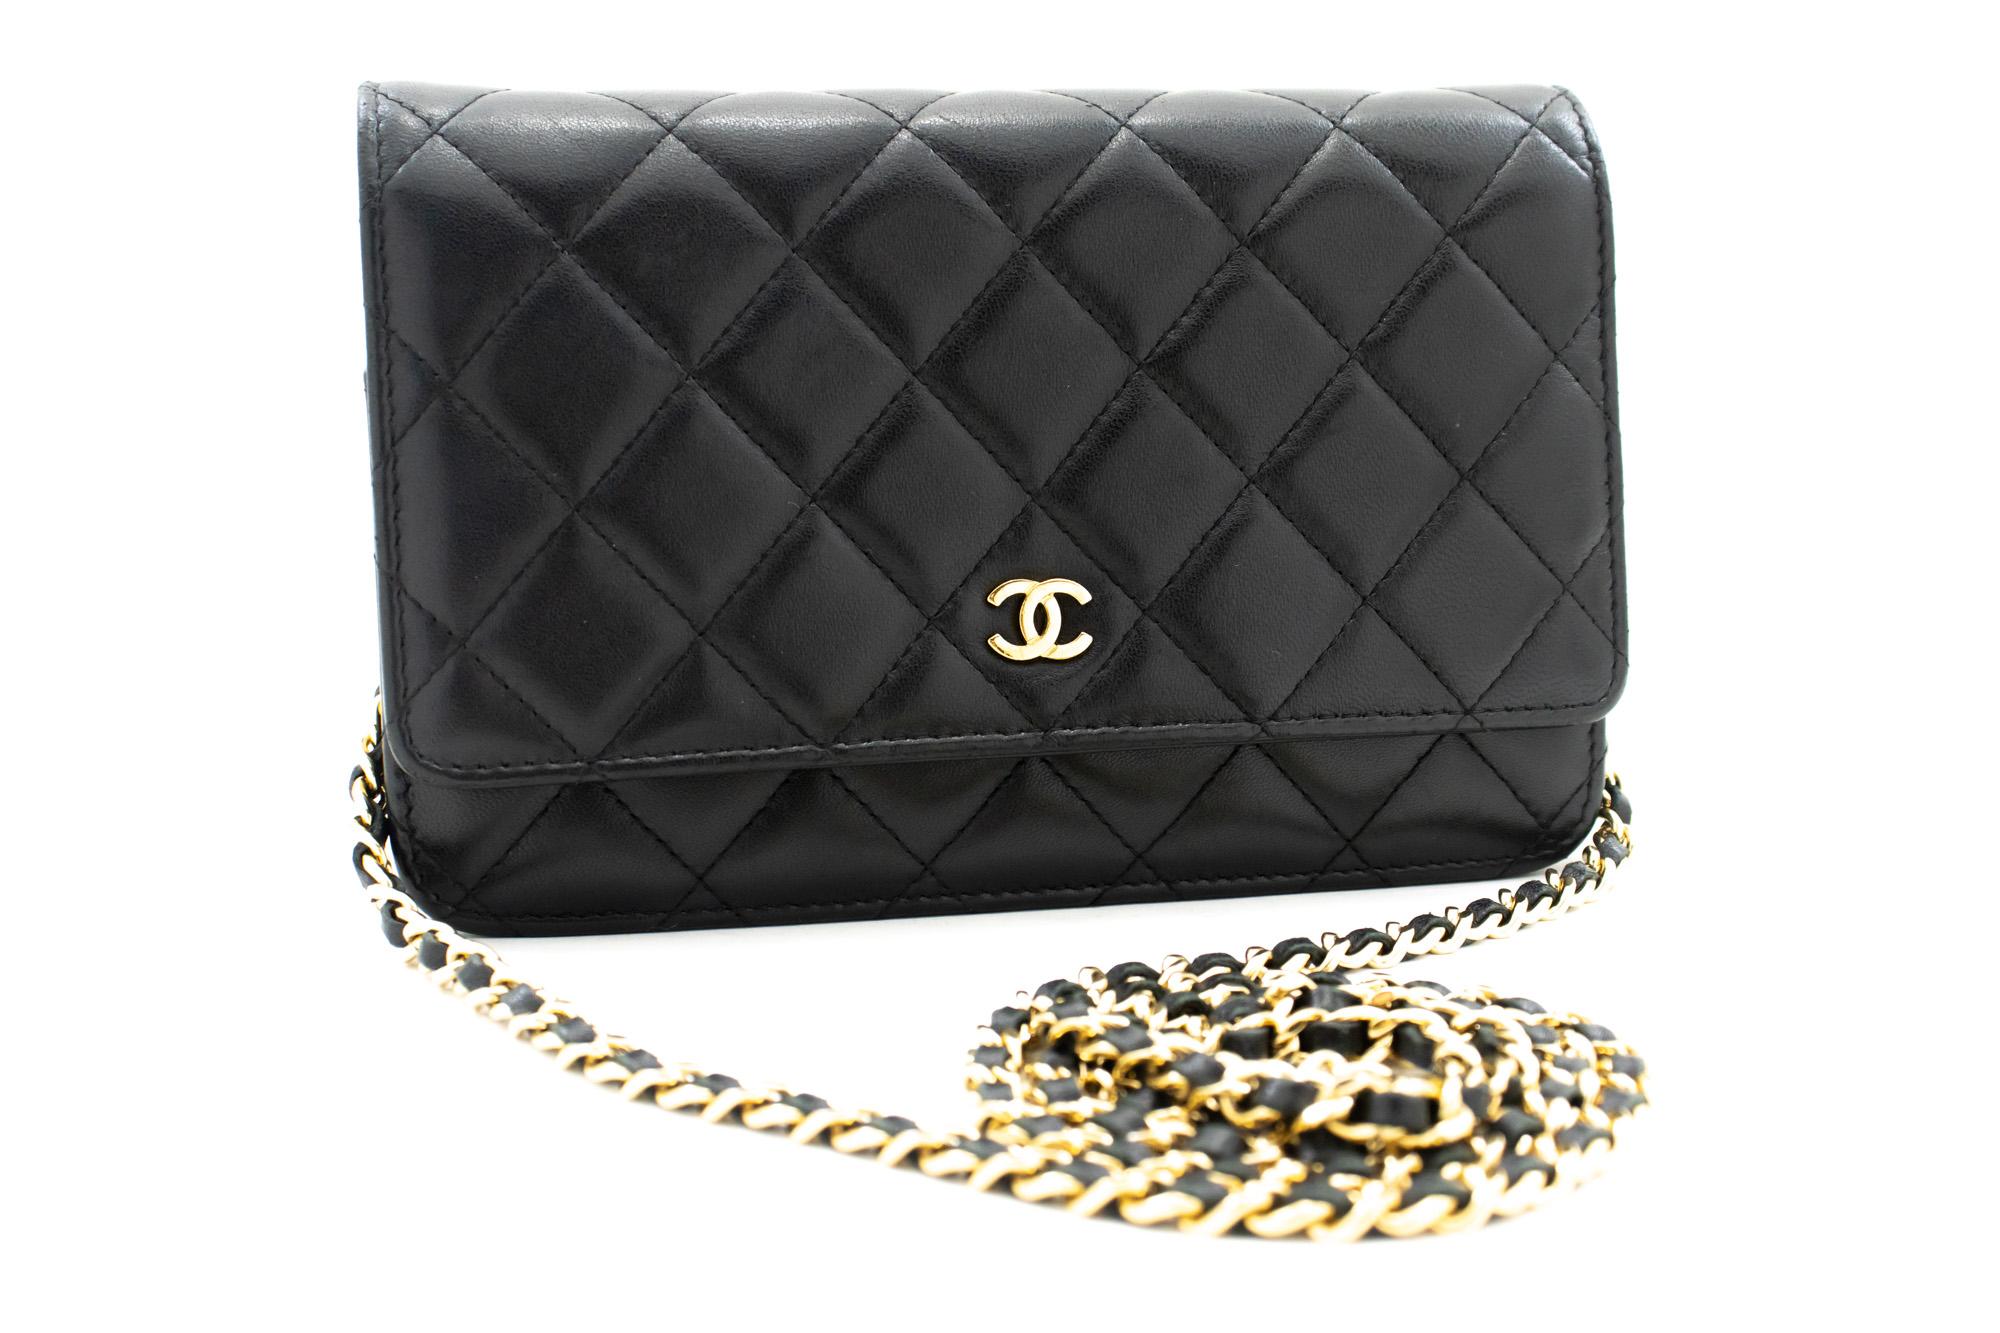 An authentic CHANEL Black Classic Wallet On Chain WOC Shoulder Bag Crossbody. The color is Black. The outside material is Leather. The pattern is Solid. This item is Contemporary. The year of manufacture would be 2017.
Conditions & Ratings
Outside